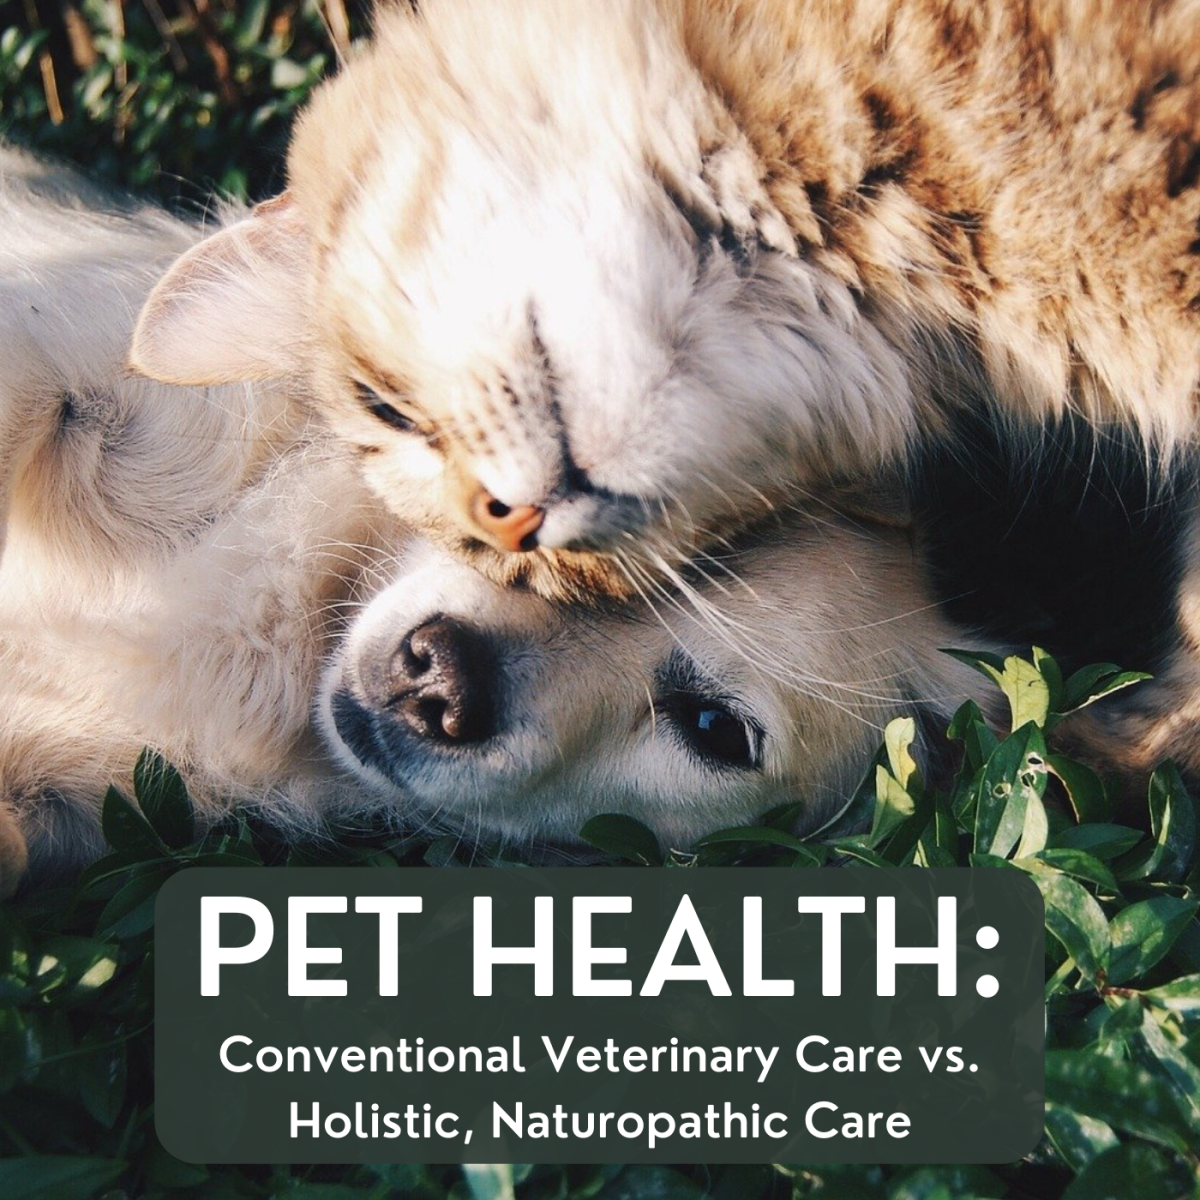 Compare conventional veterinary medicine with holistic, naturopathic practices.